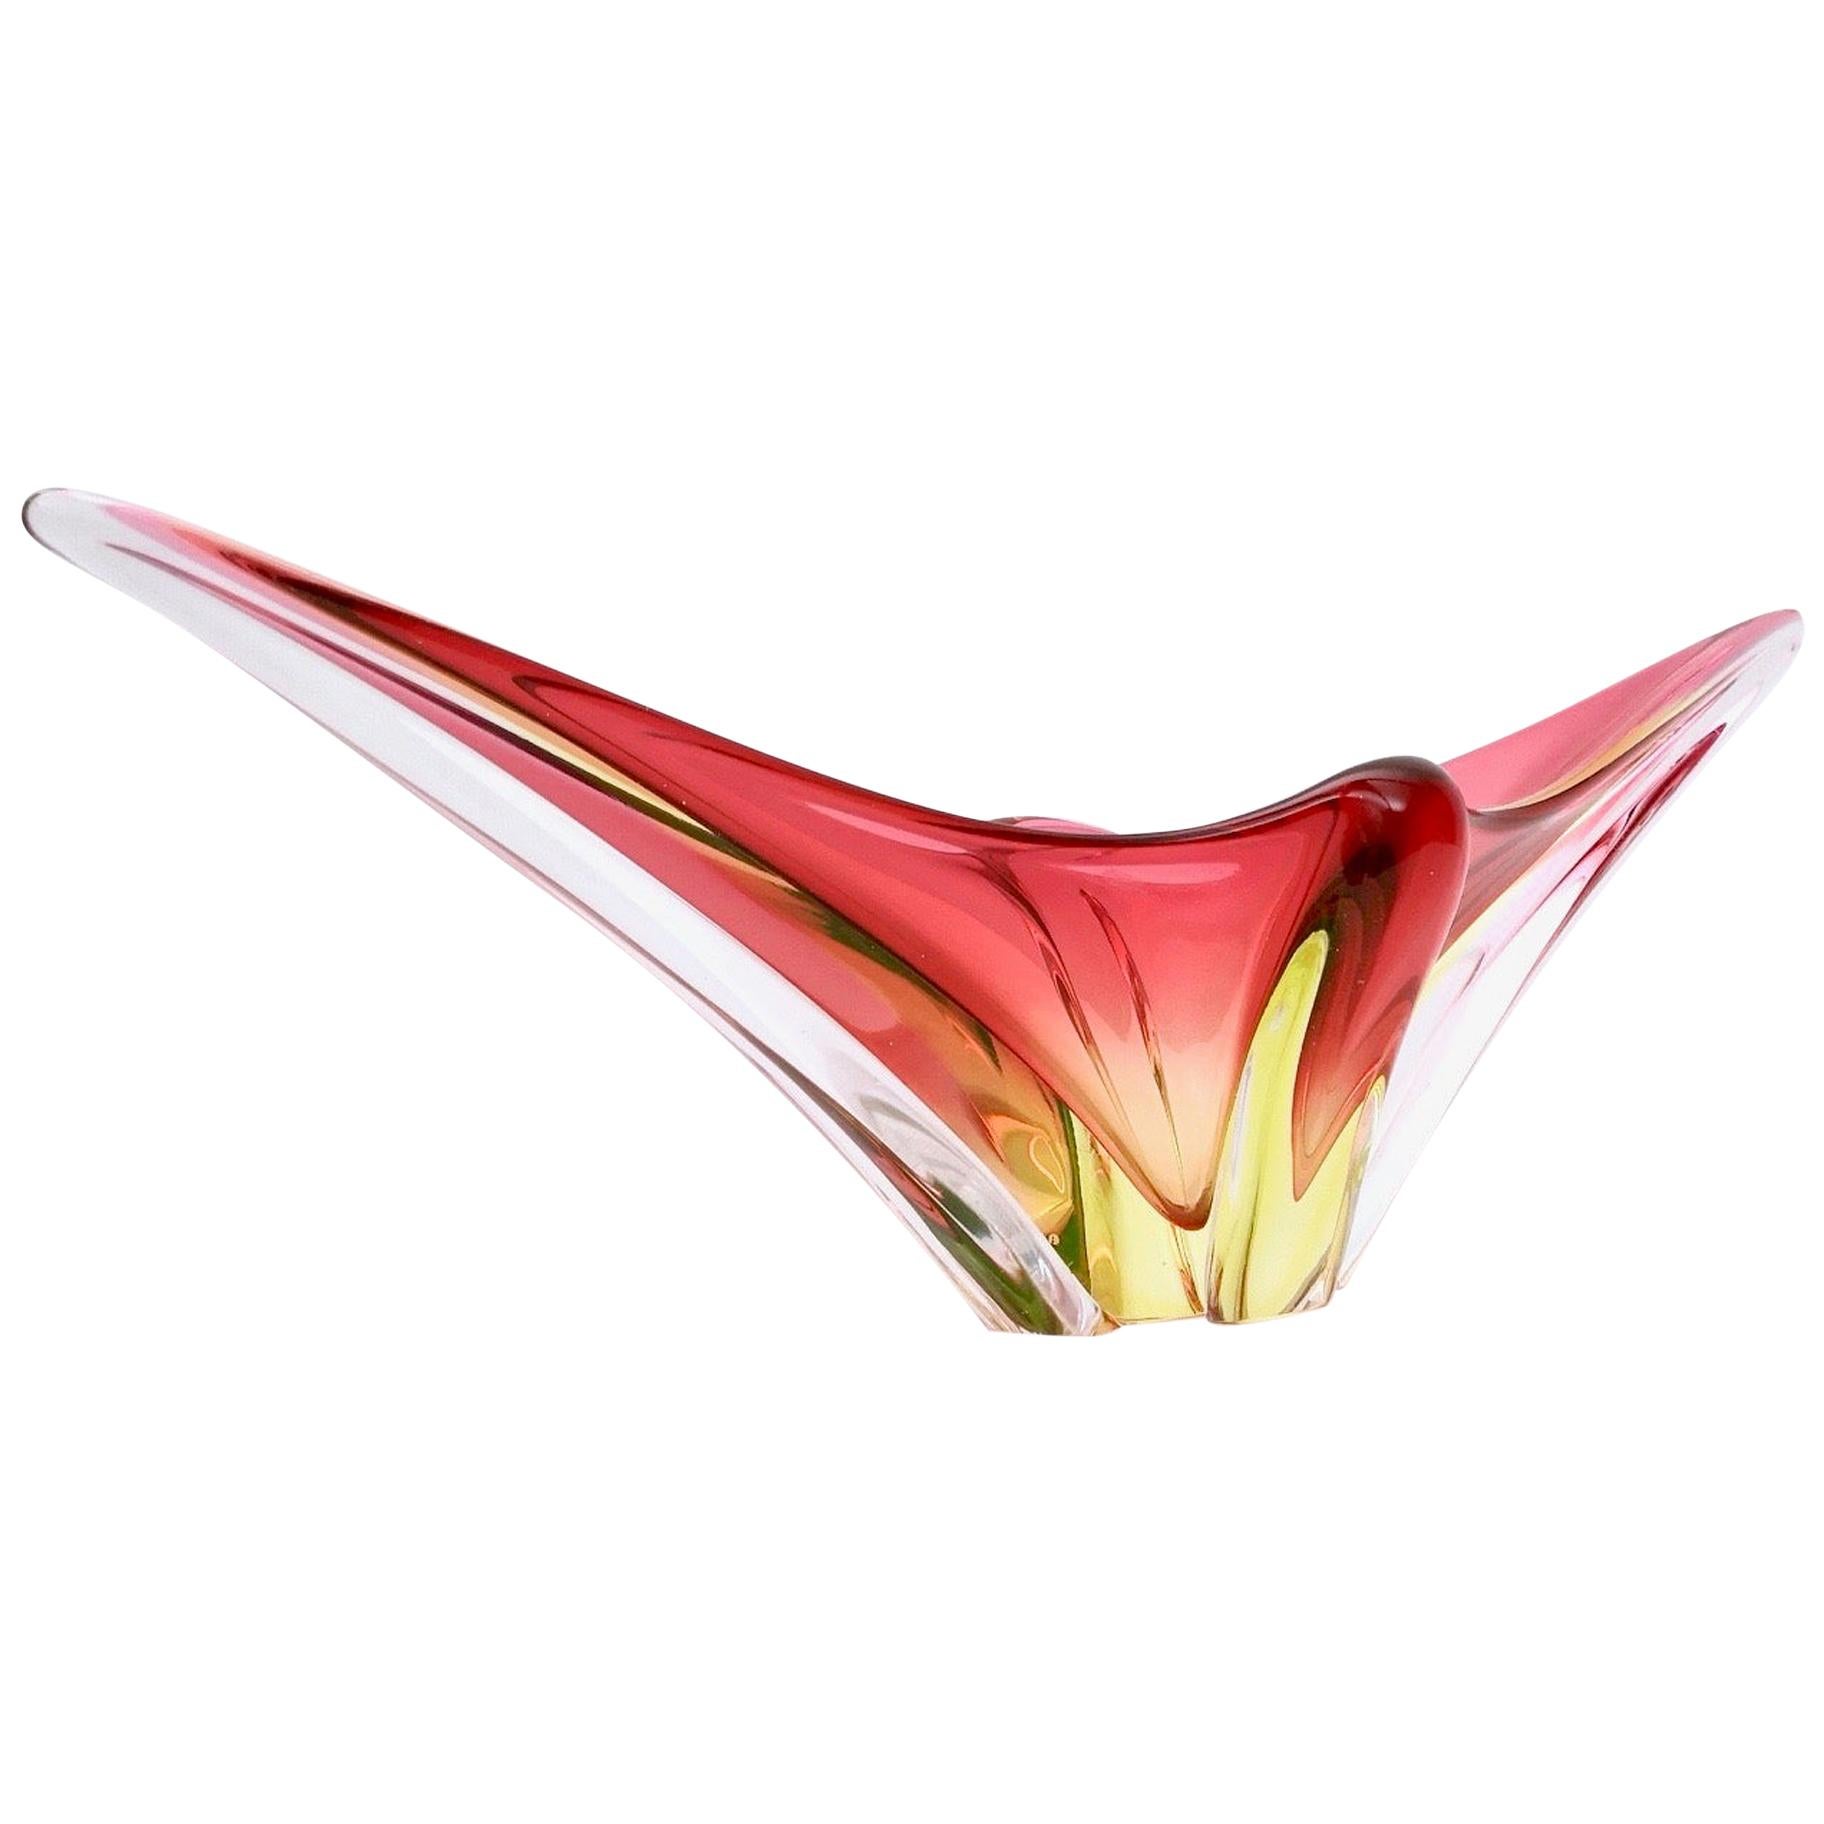 Stunning Red and Yellow Murano Glass Vase or Centerpiece, Italy, 1950s